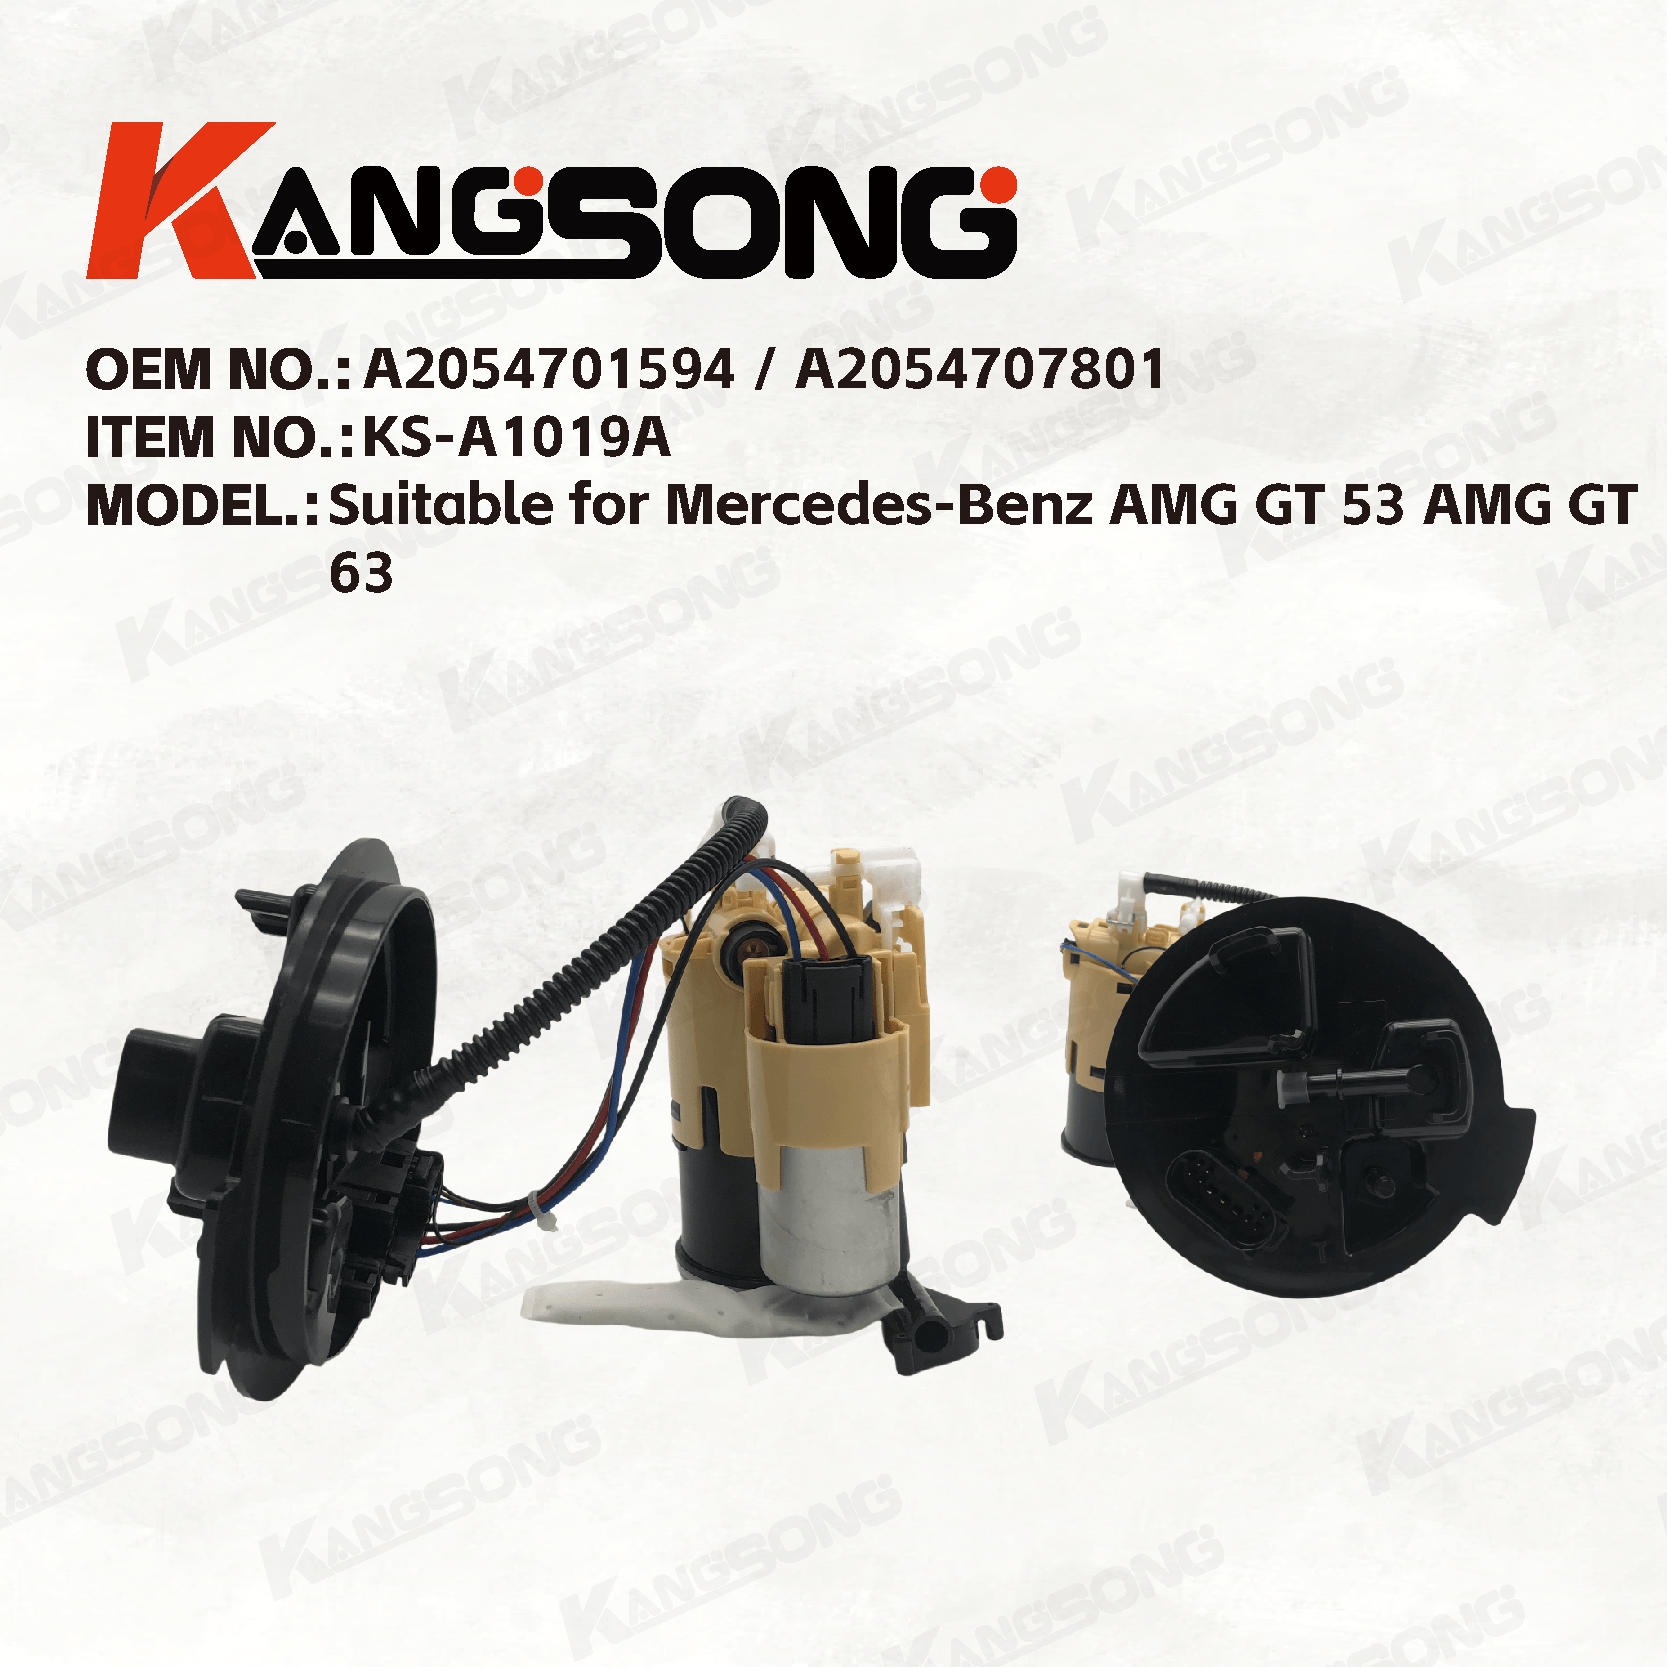 Applicable to Mercedes-Benz AMG GT 53 AMG GT 63 AMG GT 63 S C300 C400 C450 /A2054701594 / A2054707801/ Fuel Pump Assembly/KS-A1019A